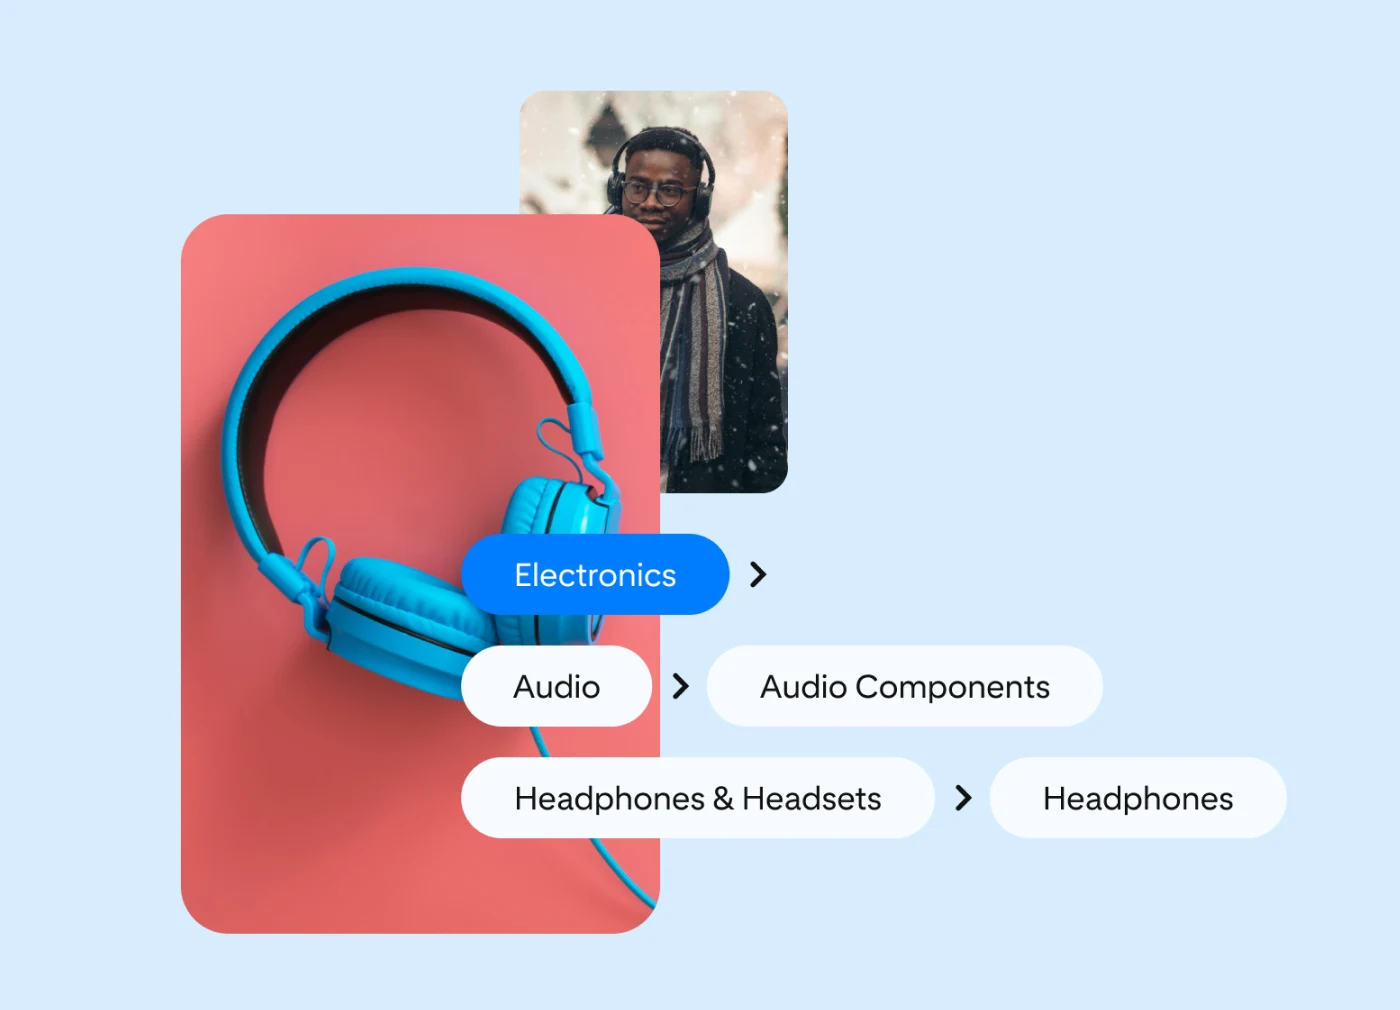 Two Pins presented in a stacked arrangement. The first Pin showcases a man wearing headphones, while the second Pin features blue headphones against a red background. Text bubbles within the image indicate the levels of product categorisation.